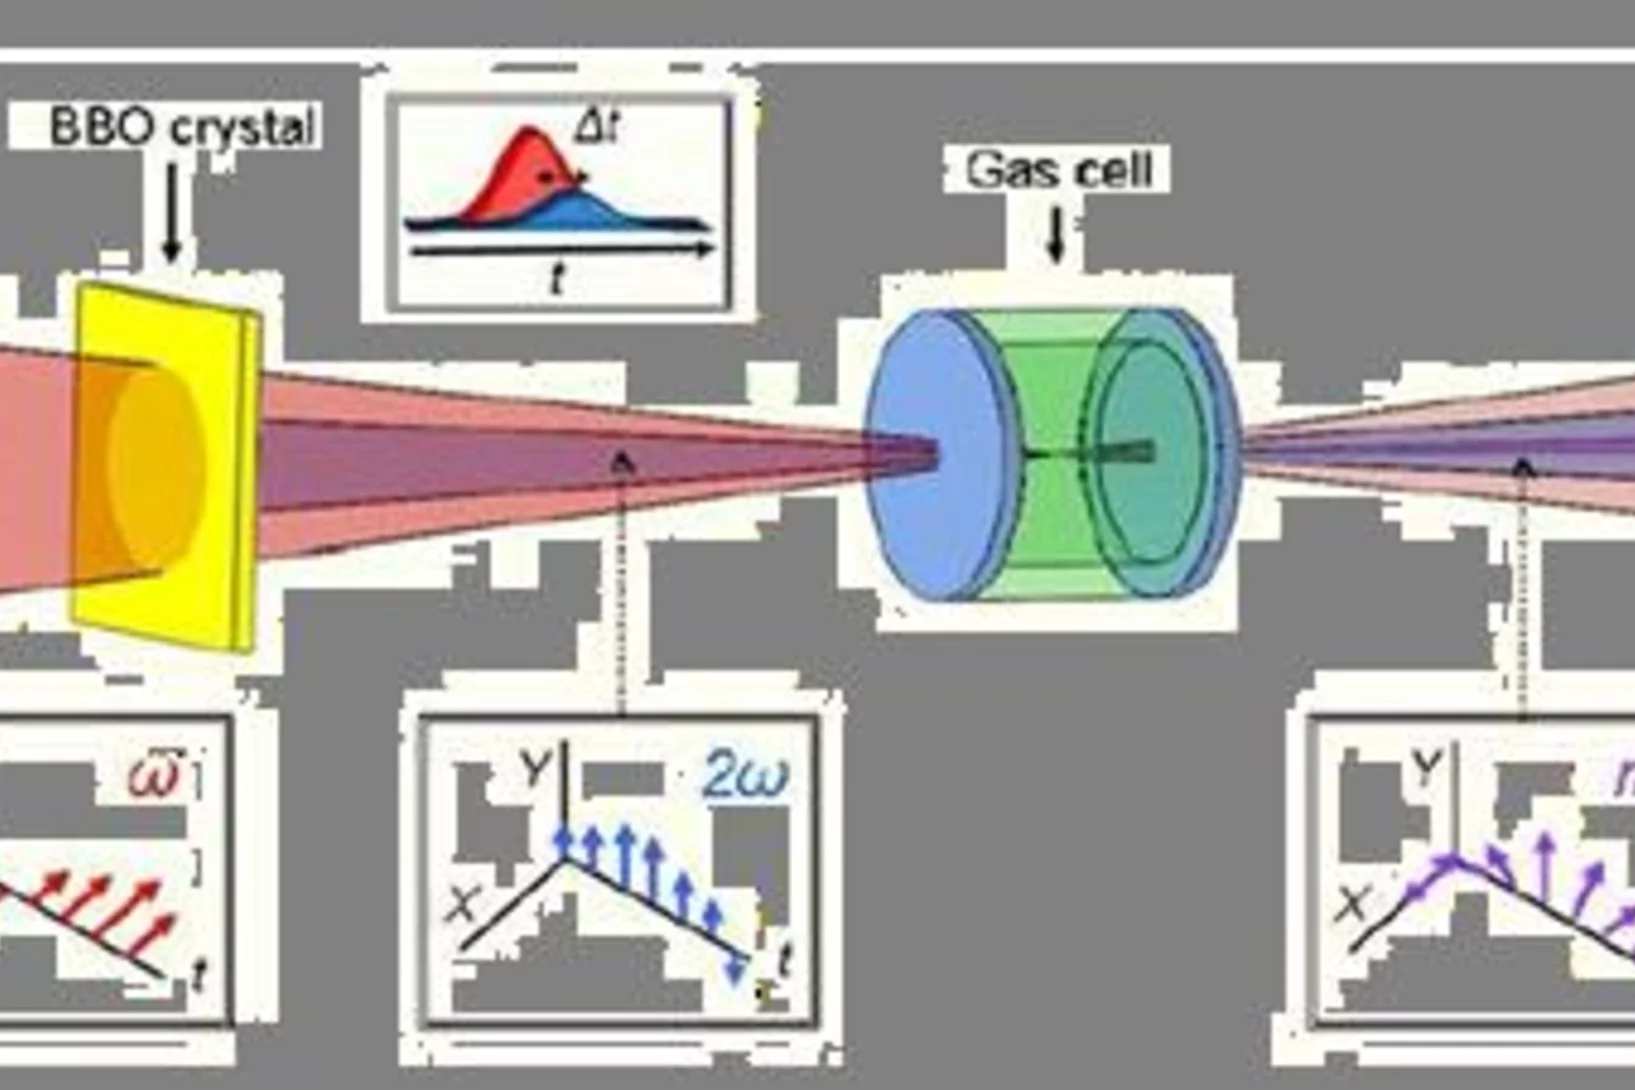 Table-top soft x-ray laser delivering circularly polarized femtosecond pulses